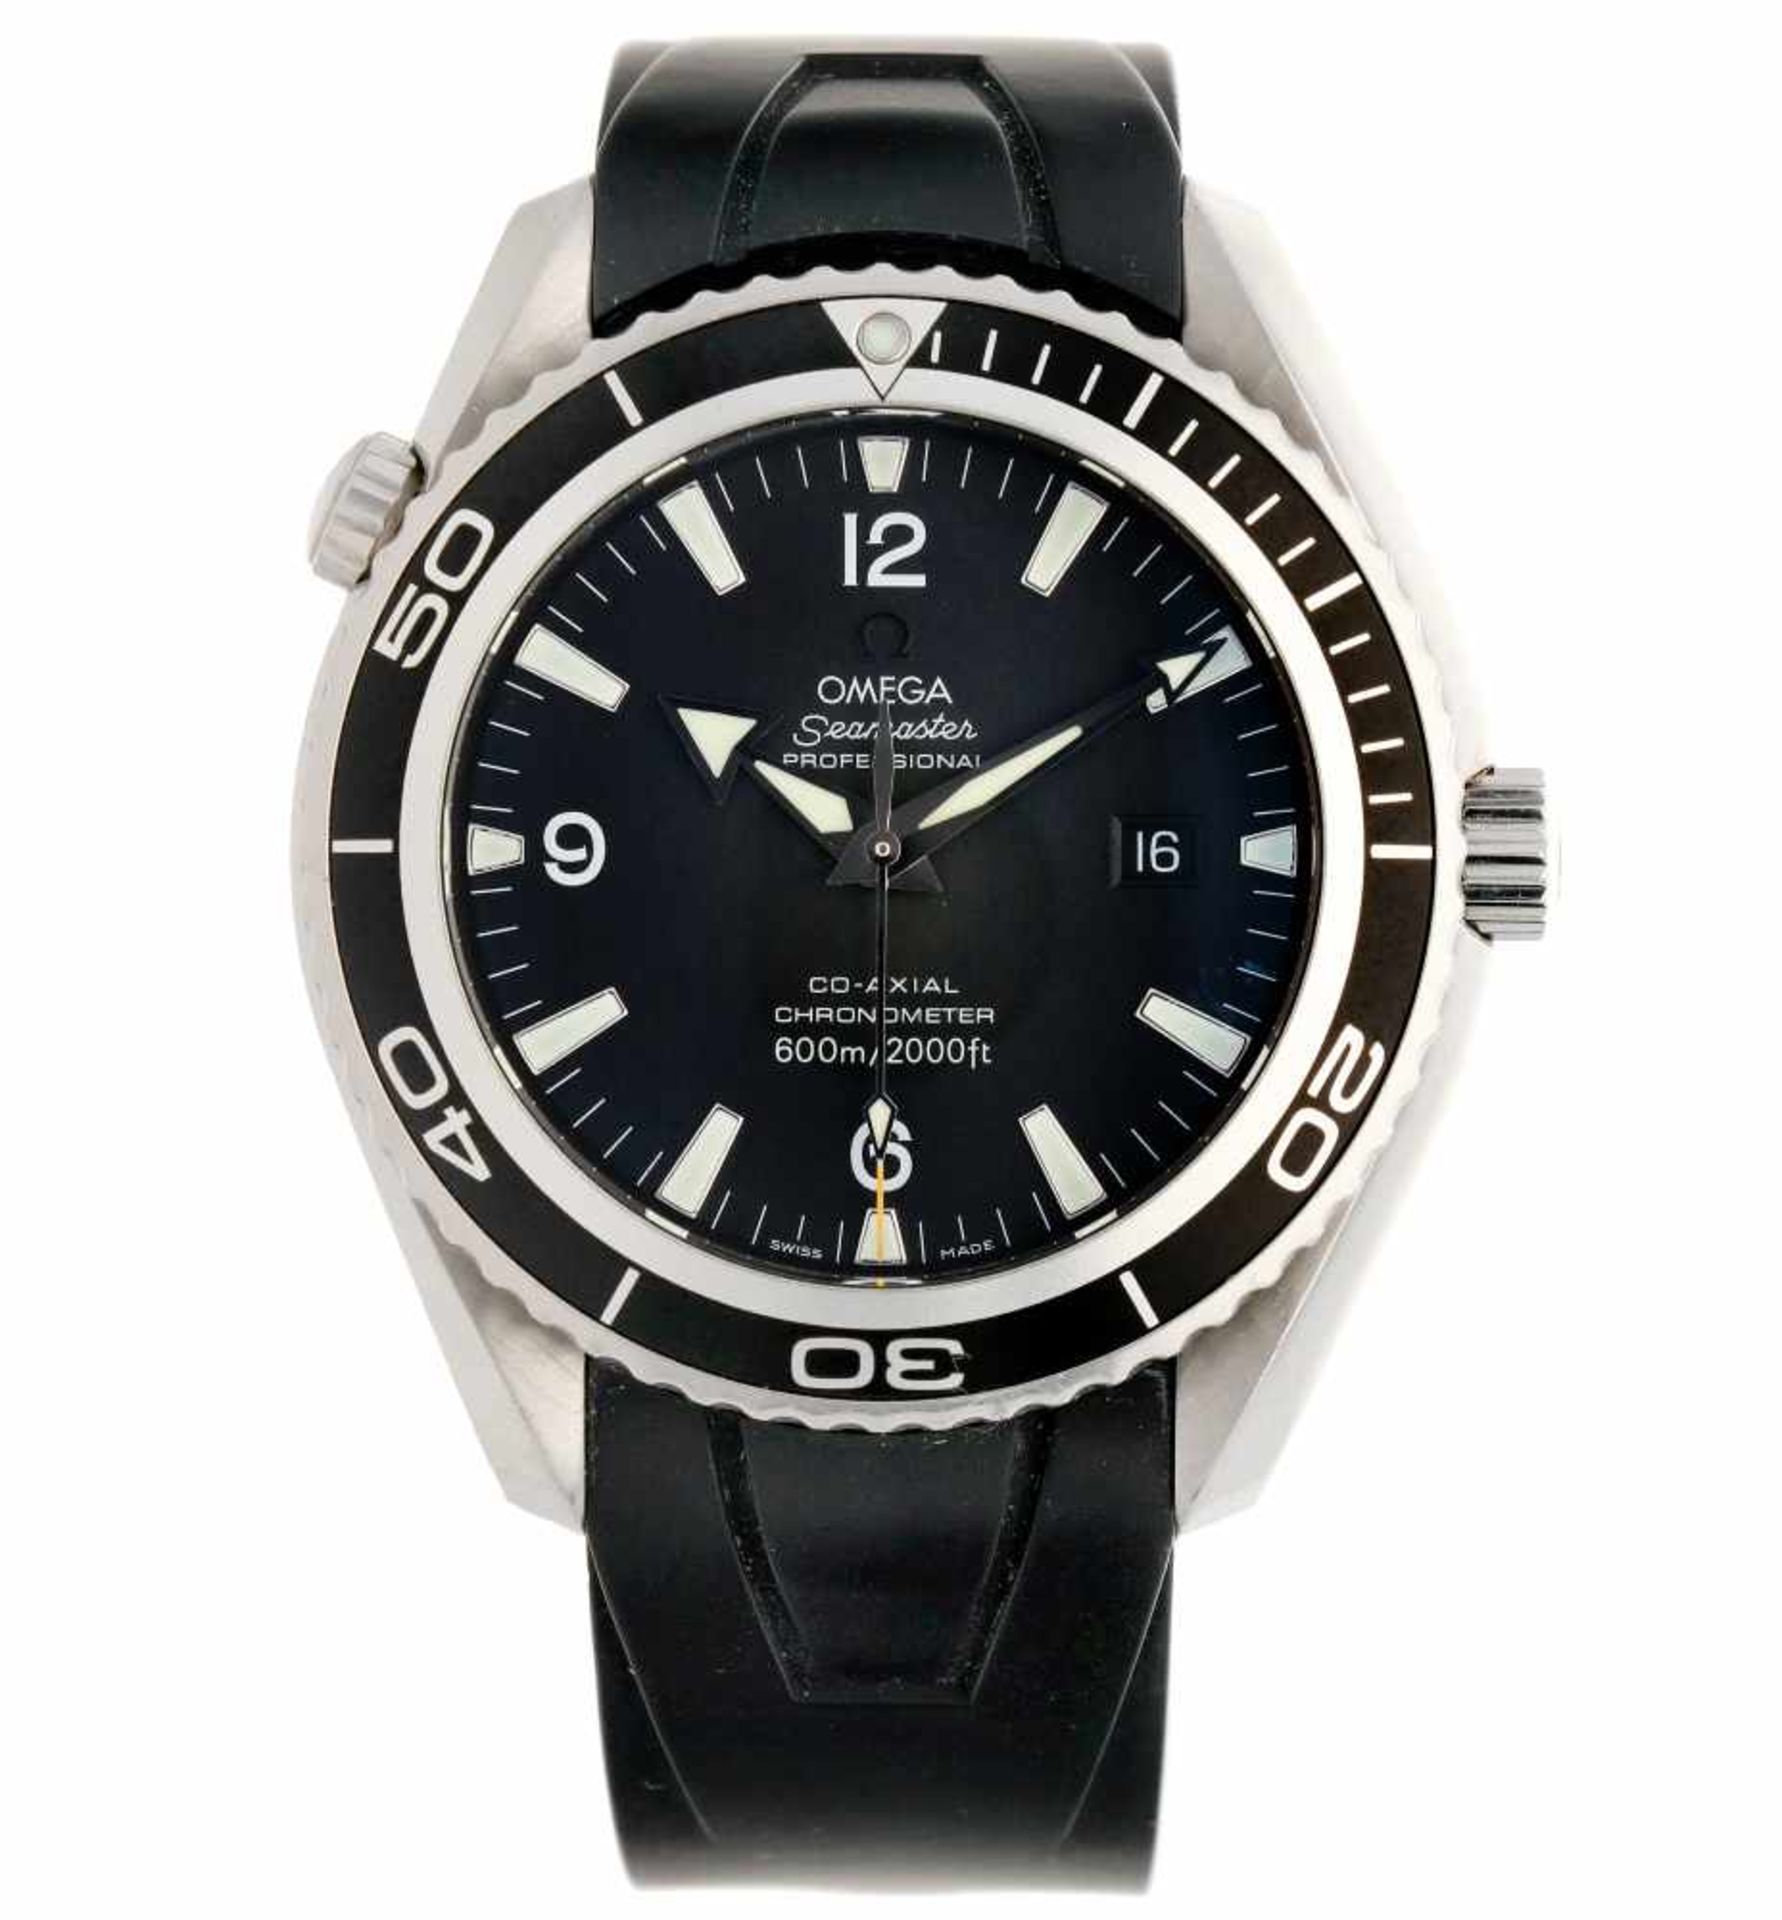 Omega Seamaster Planet Ocean 29005091 - Men's watch - Automatic - Ca. 2008.